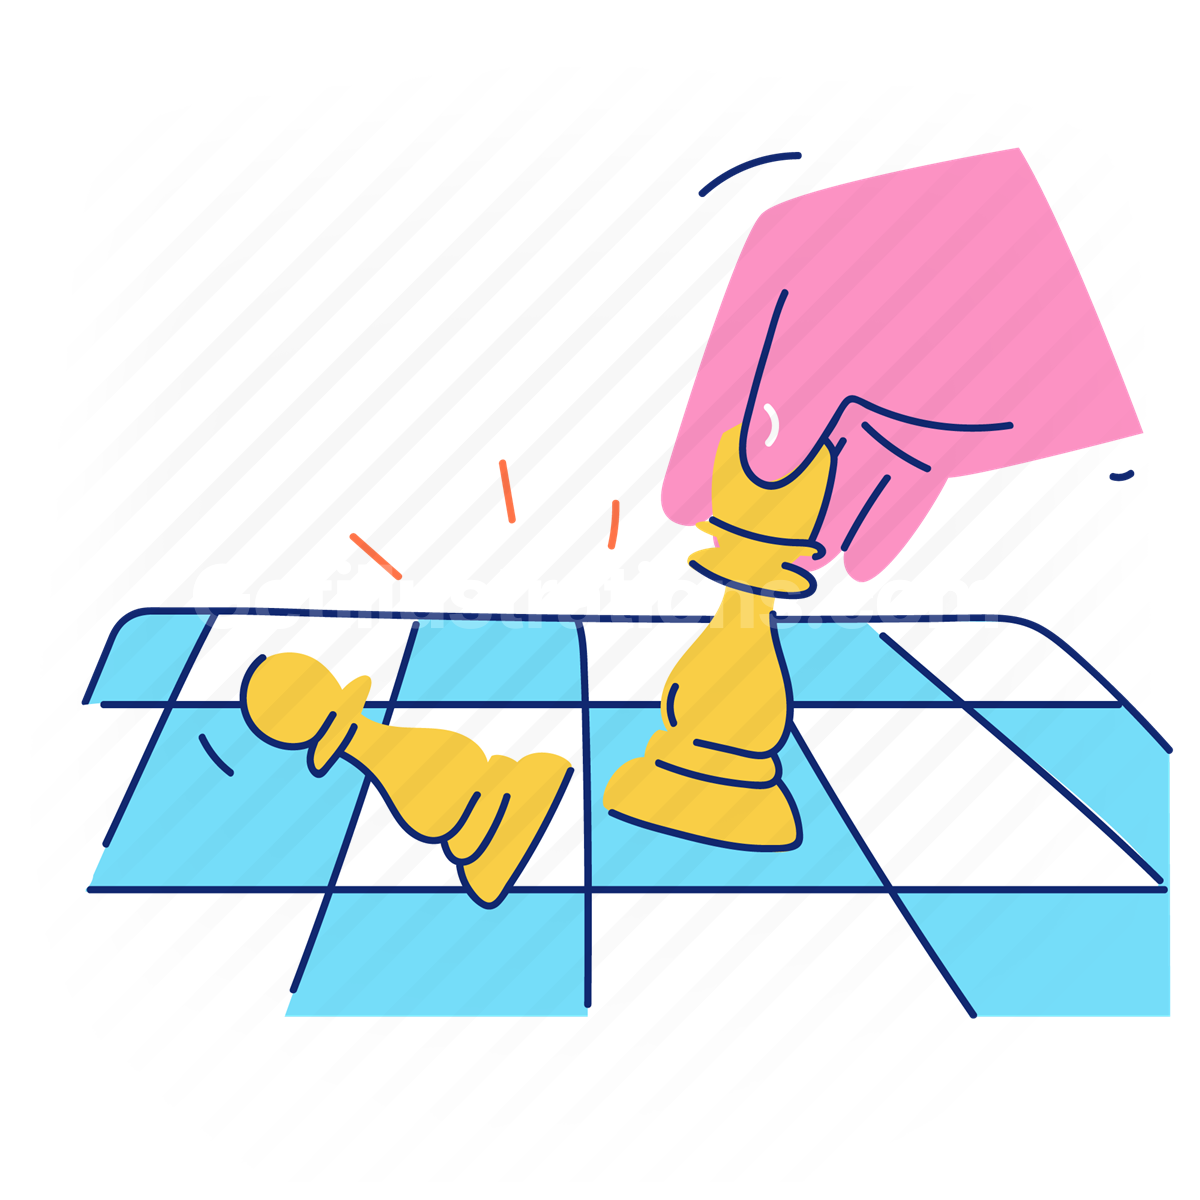 chess, strategy, hand, gesture, pawn, game